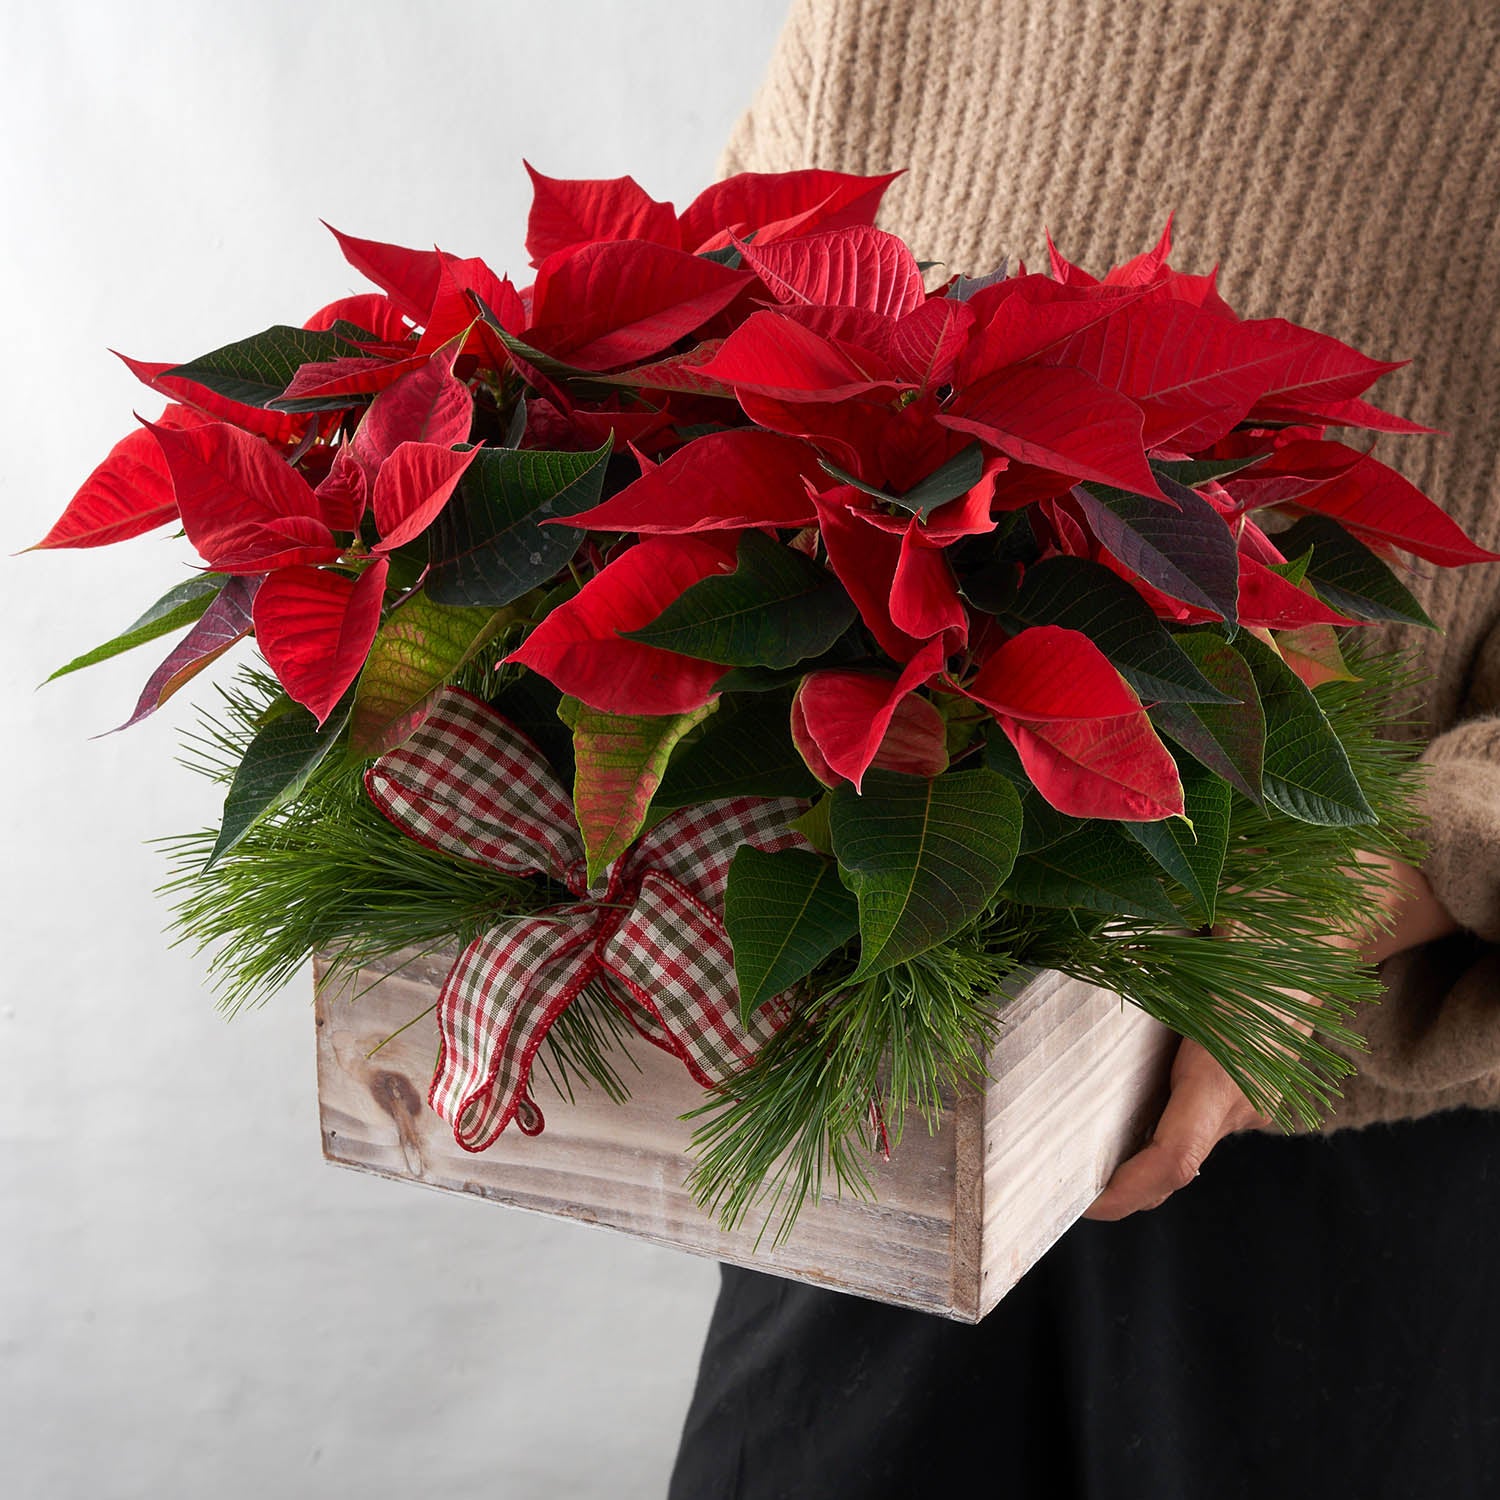 Person holding, red poinsettia plant, pine boughs, and plaid bow, in wooden box.